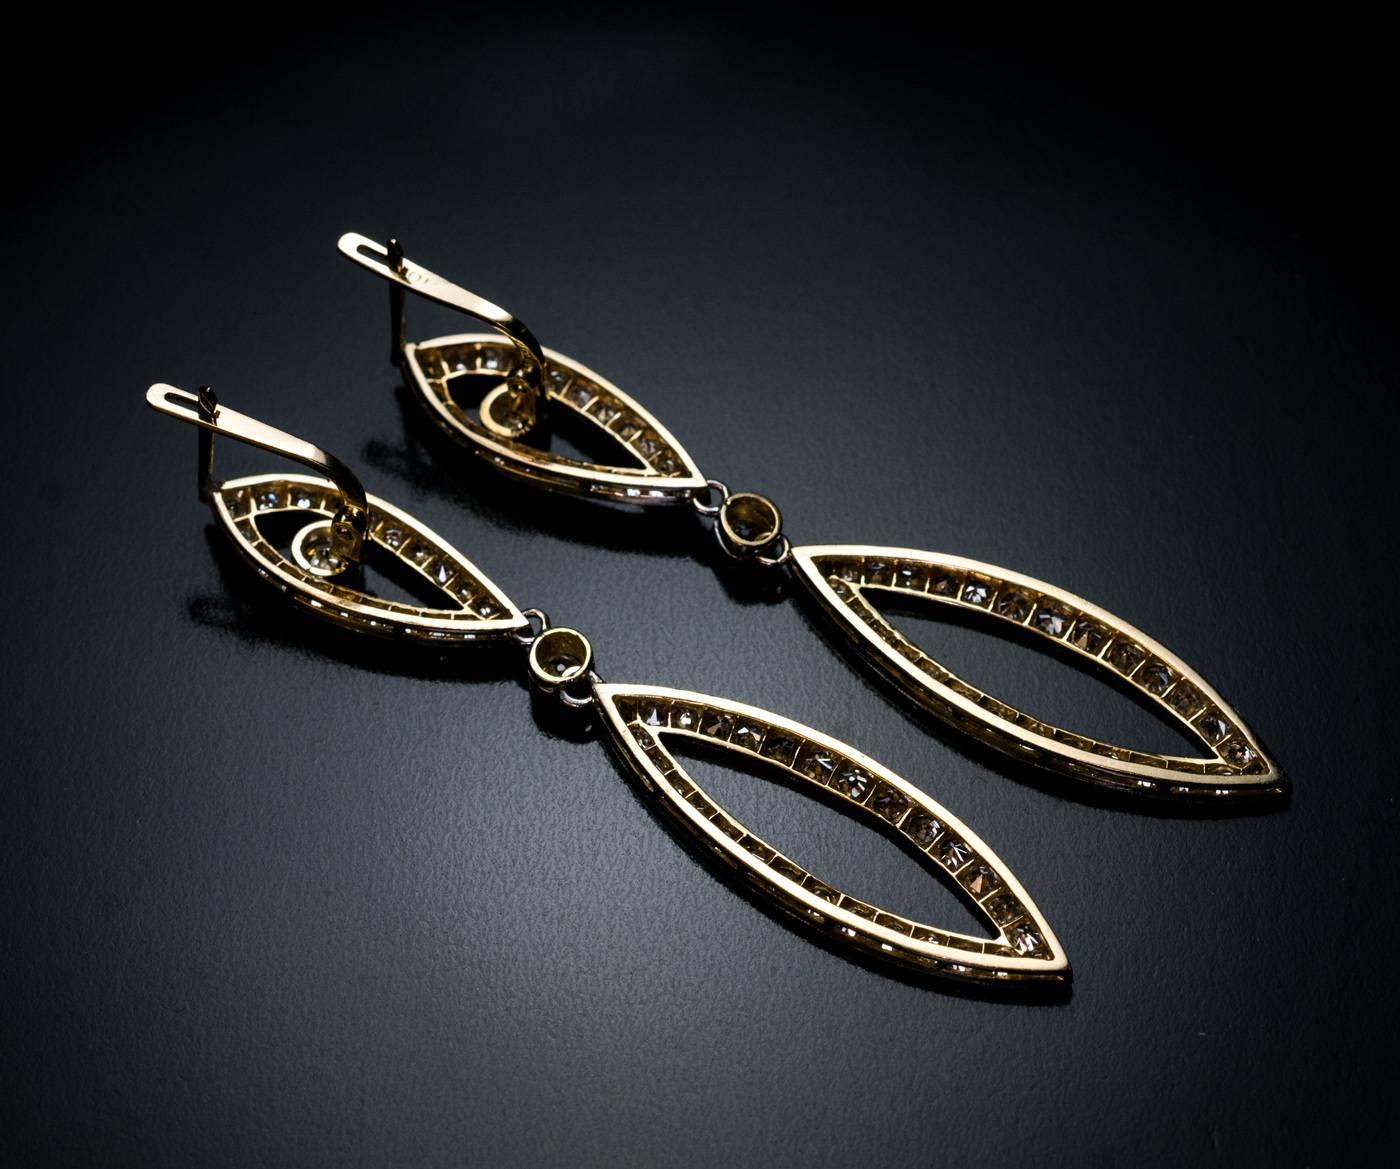 Circa 1925

These elegant vintage dangle earrings from Art Deco era are crafted in platinum-topped 18K gold (front – platinum, back – gold) and set with old European cut and single cut diamonds.

Estimated total diamond weight is 2.70 ct.

Weight 4